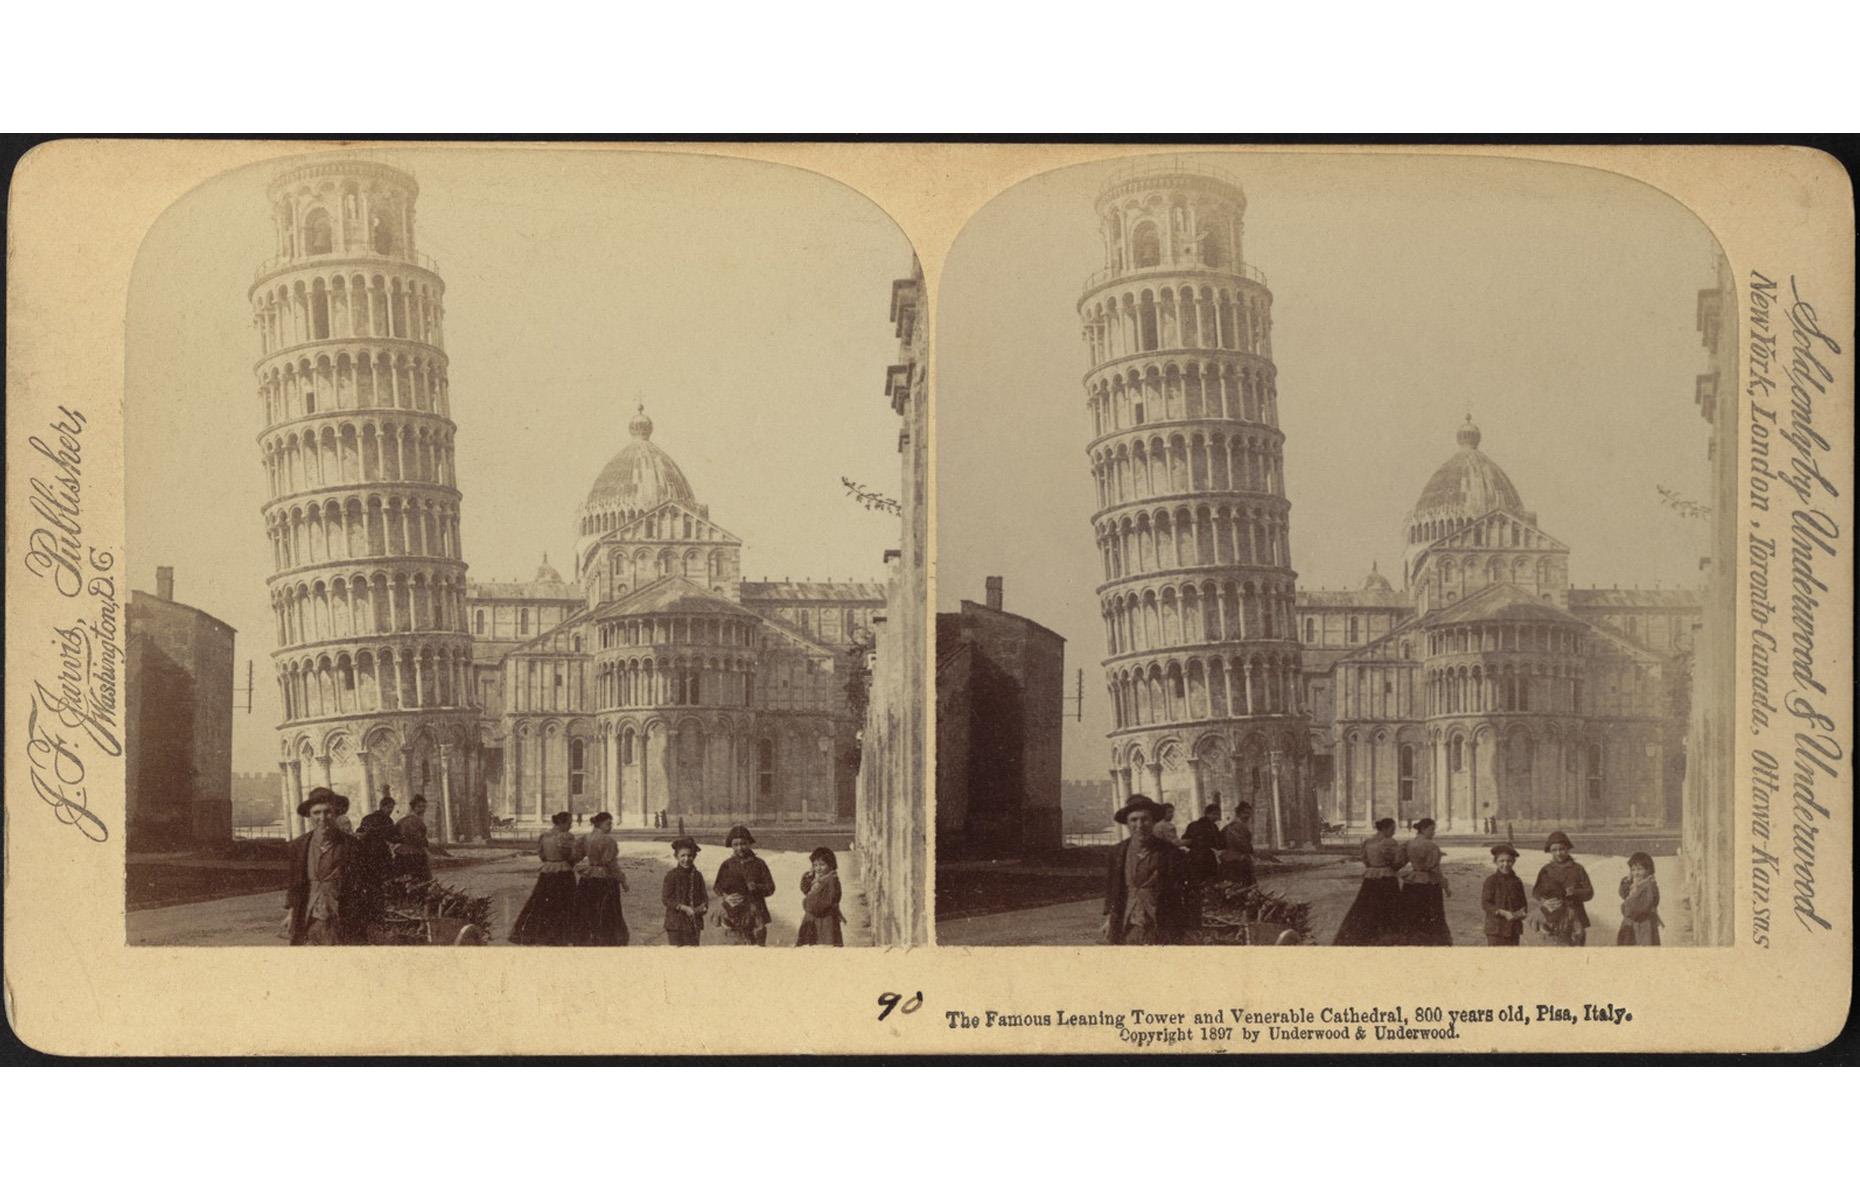 <p>The Leaning Tower of Pisa began tilting by the time the first story was completed in 1178 and has been sloping an extra 0.05 inches per year ever since, although efforts to stabilize it have reduced the incline. That hasn’t stopped an estimated 500,000 people climbing the 251 steps to the bell tower each year. Or the nearly 6 million tourists who visit the Square of Miracles in front of the tower and have their photo taken pretending to hold it up. Photography was still a new medium when this photo was taken in 1897, and the bemused locals simply looked straight at the camera.</p>